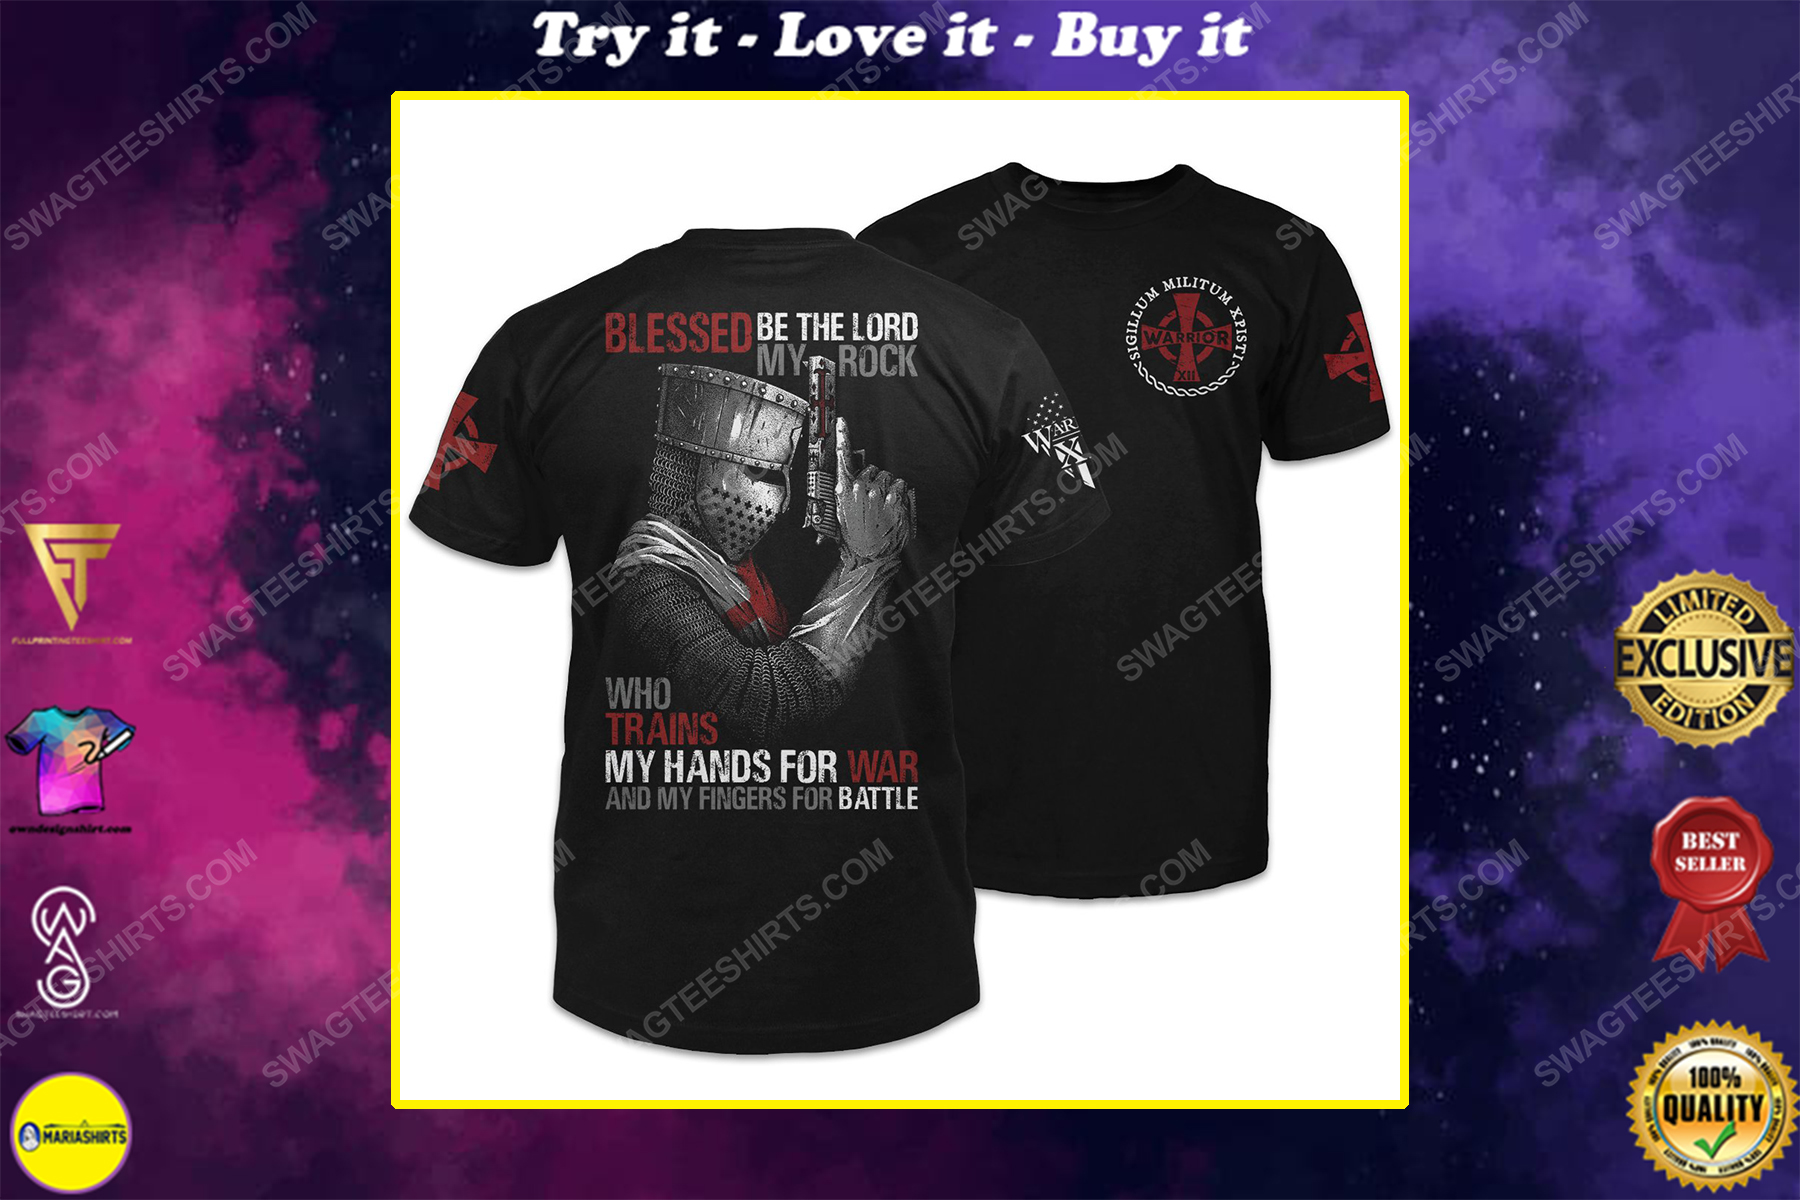 Blessed be the lord my rock who trains my hands for war and my fingers for battle shirt